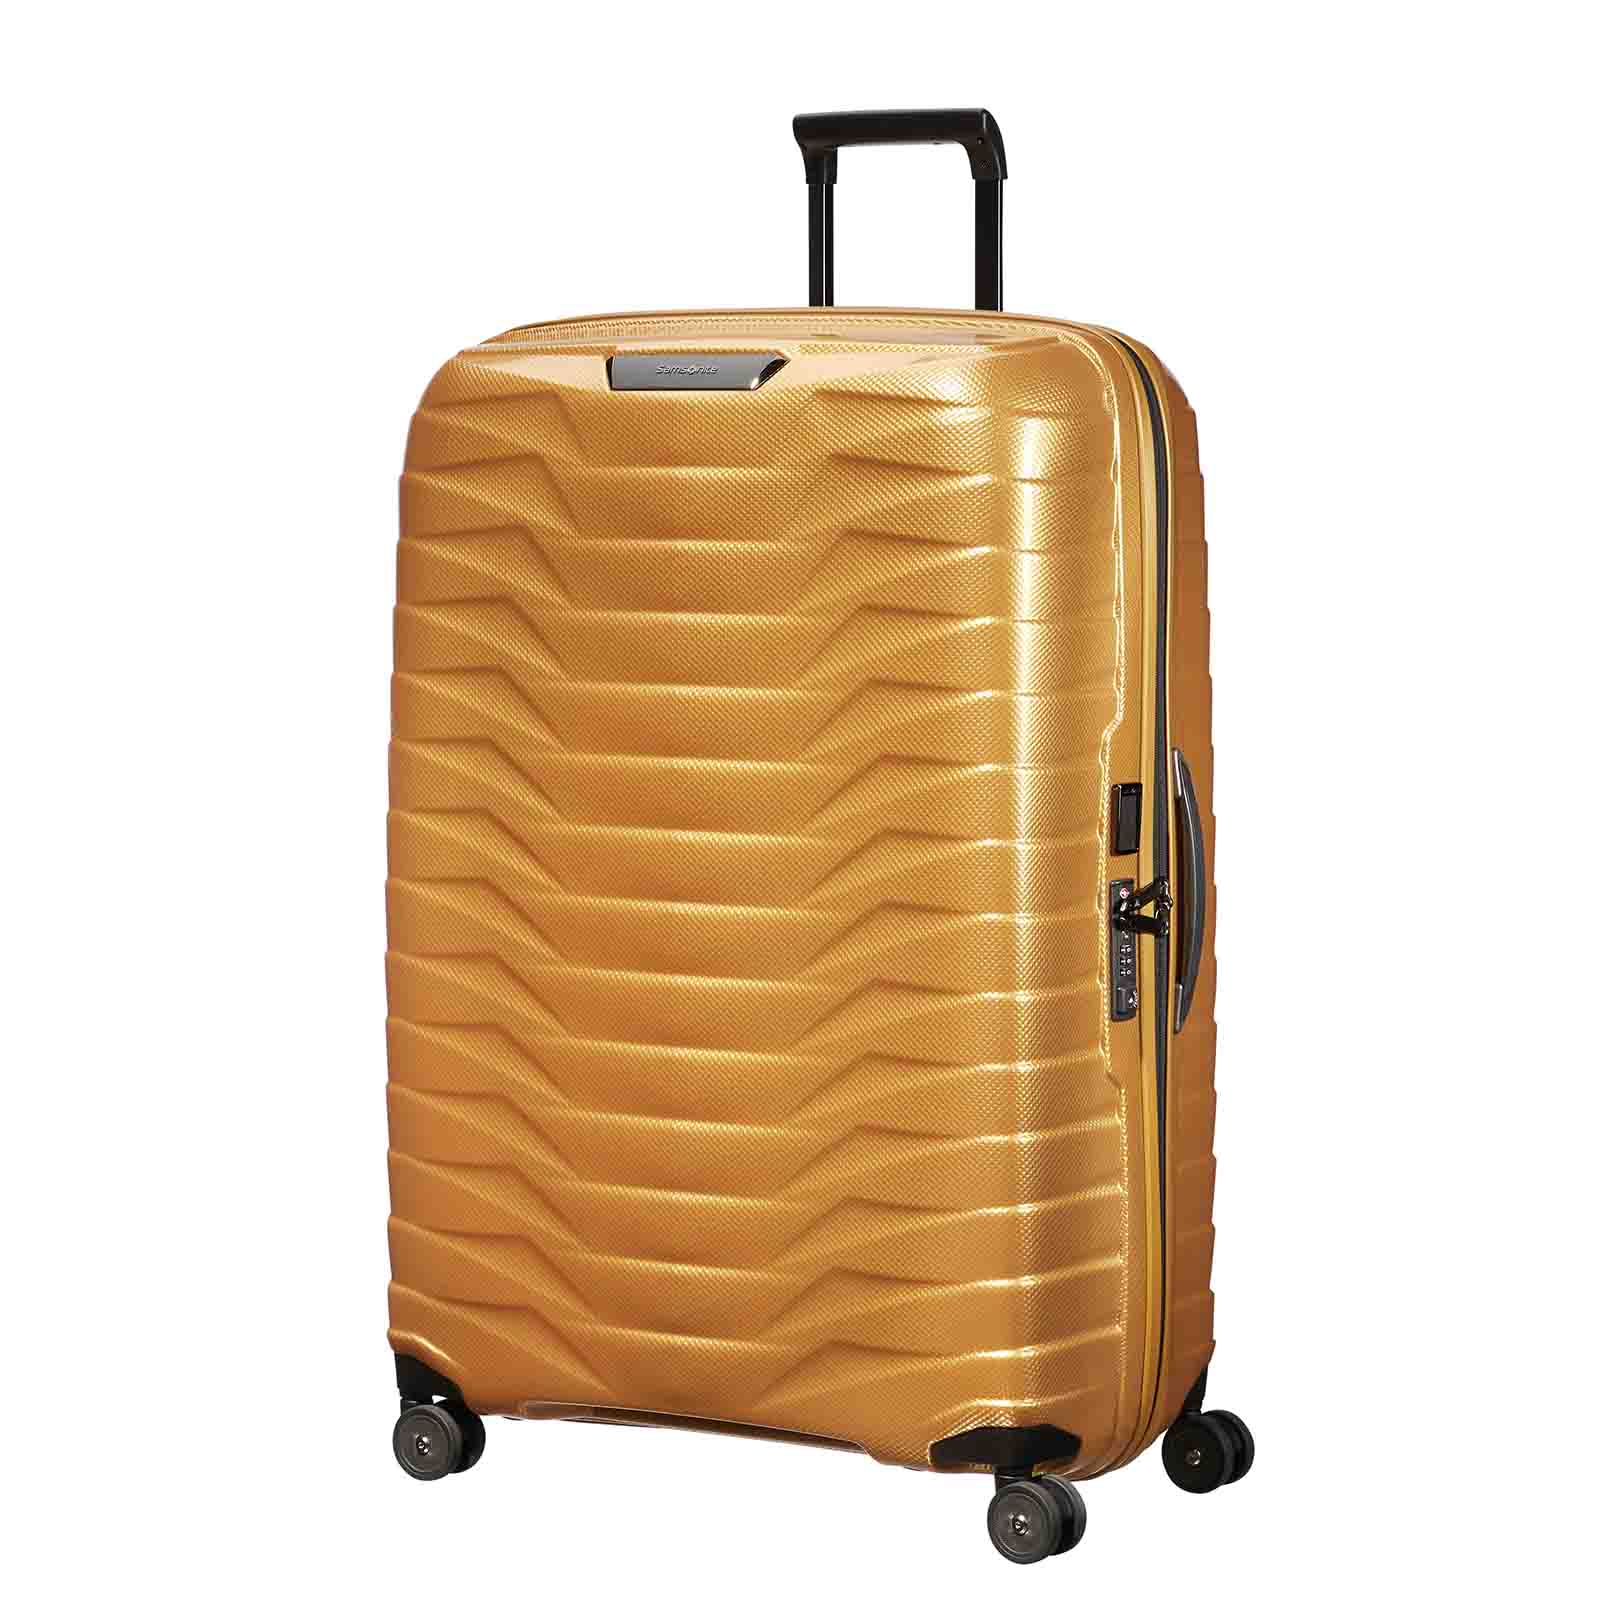 Samsonite-Proxis-81cm-Suitcase-Honey-Gold-Front-Angle